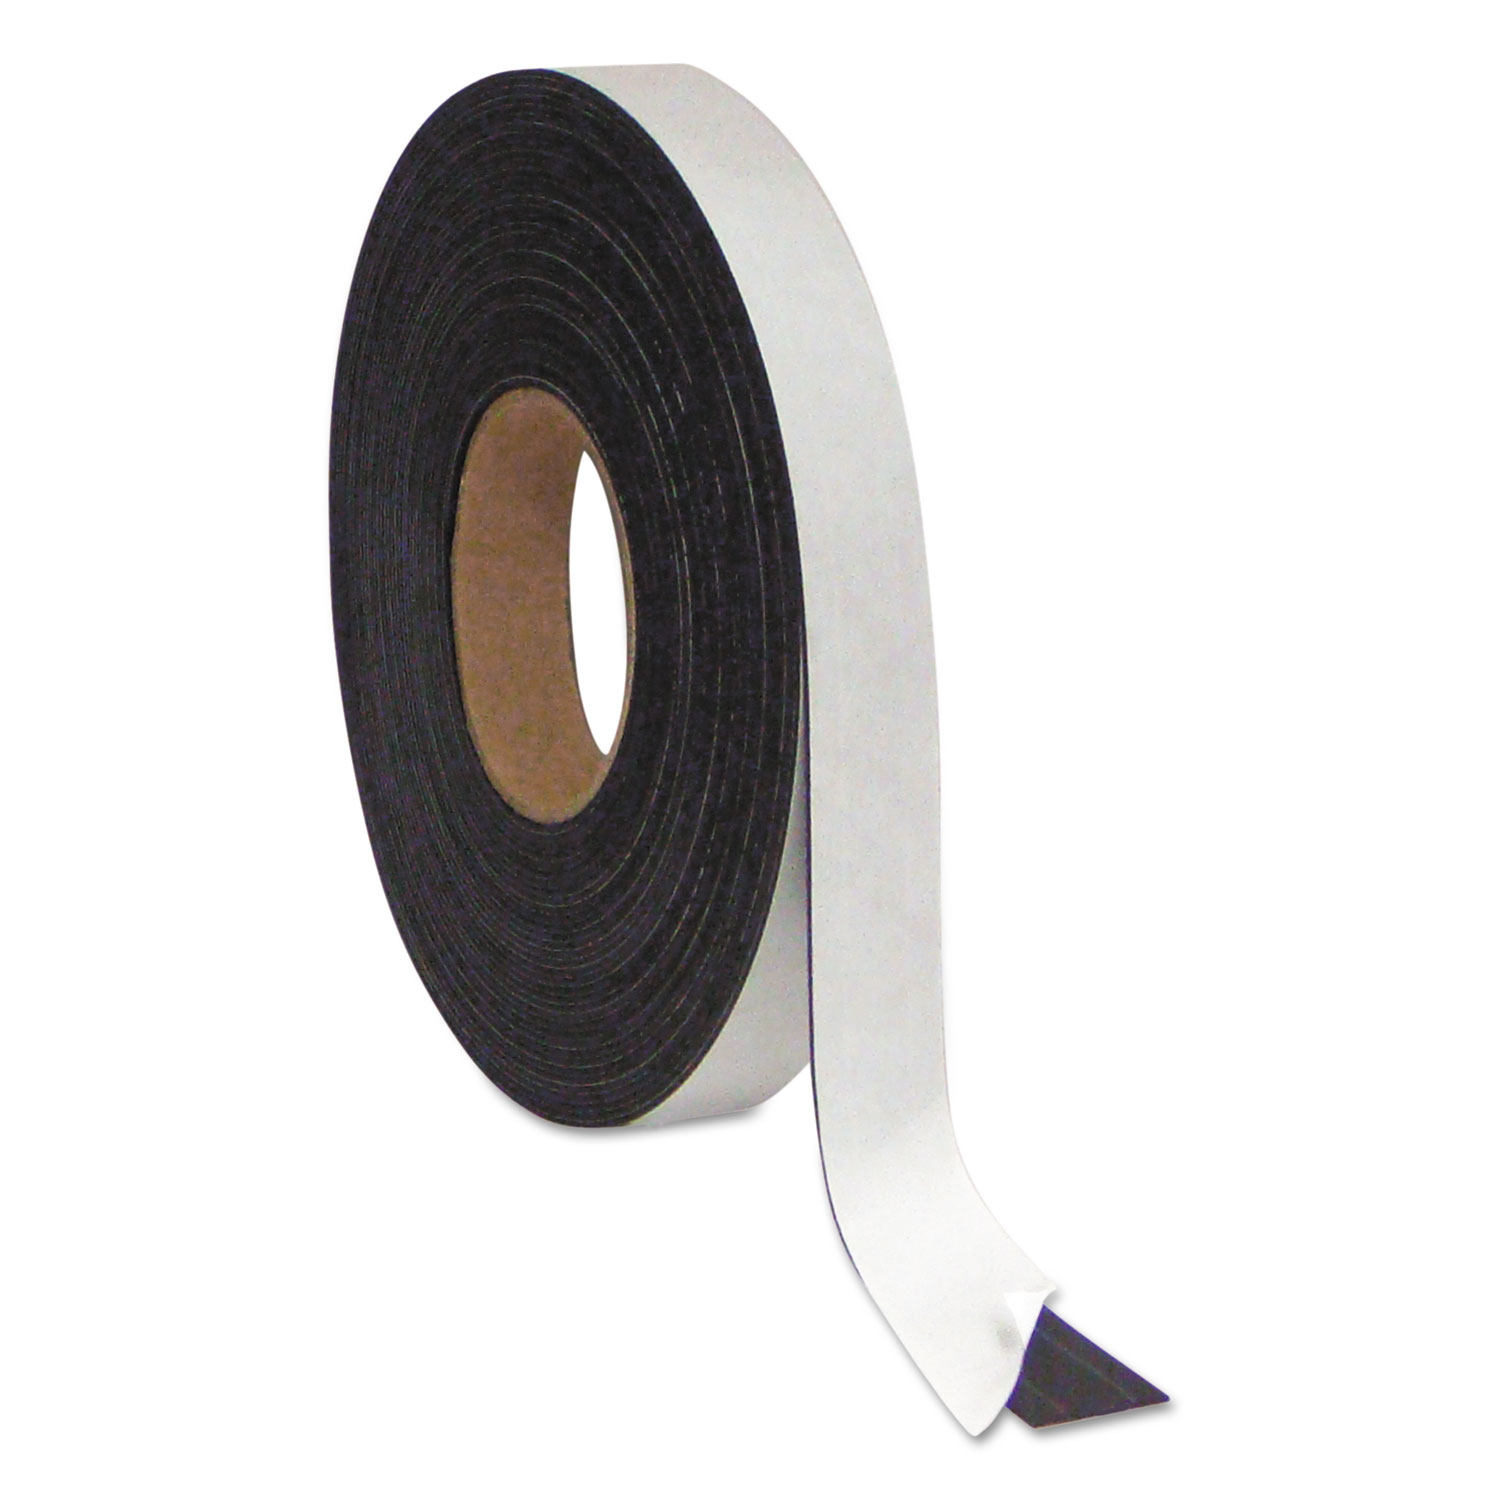  MasterVision FM2021 Magnetic Adhesive Tape Roll, Black, 1 x 50 Ft. (BVCFM2021) 